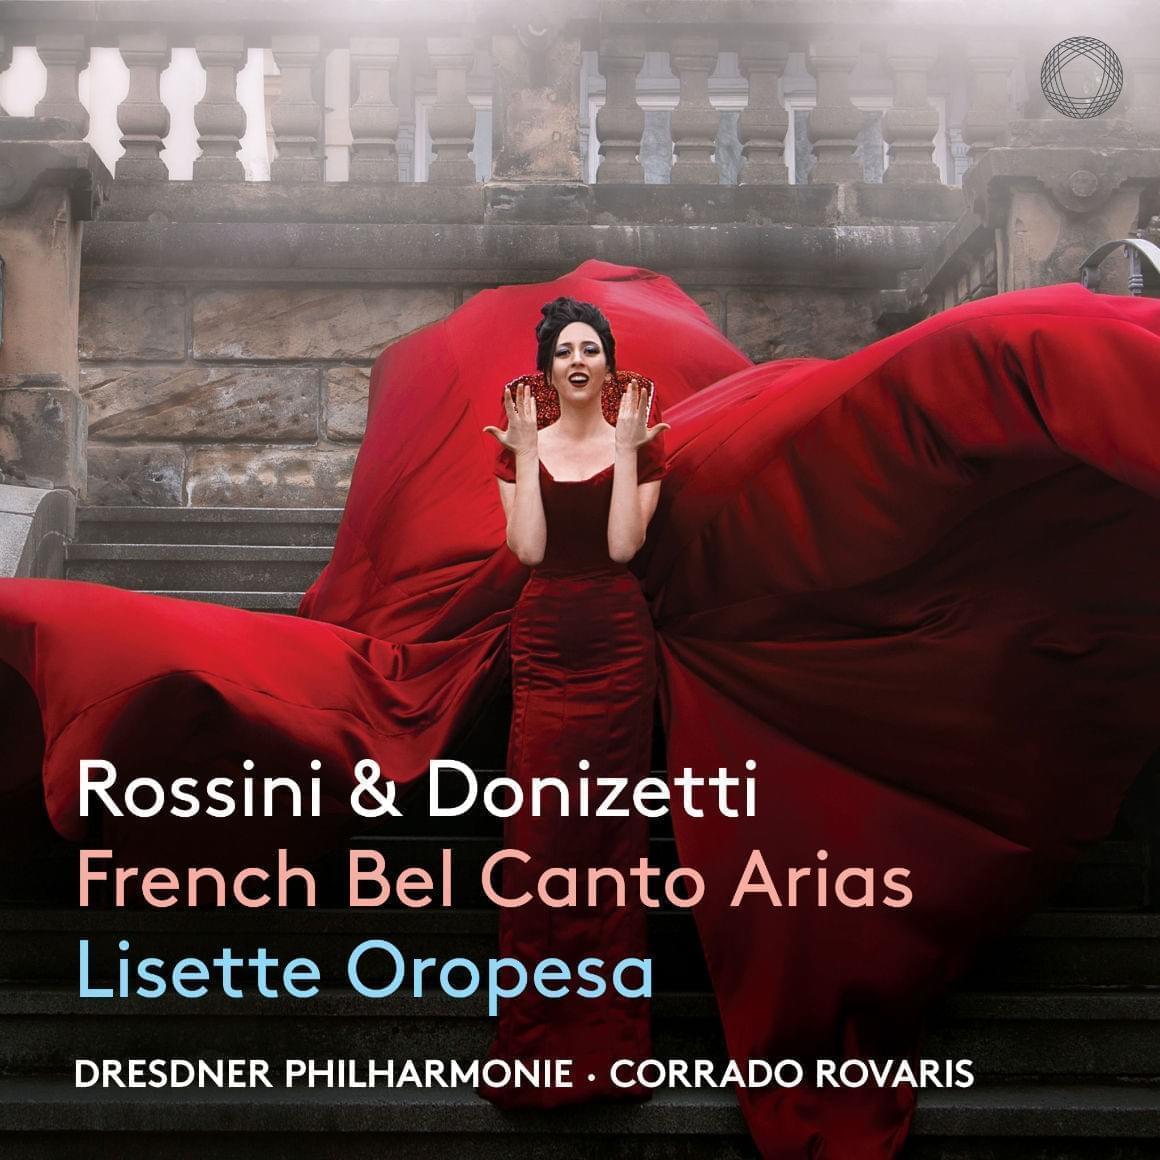 Lisette Oropesa on the cover of her new album, French Bel Canto Arias